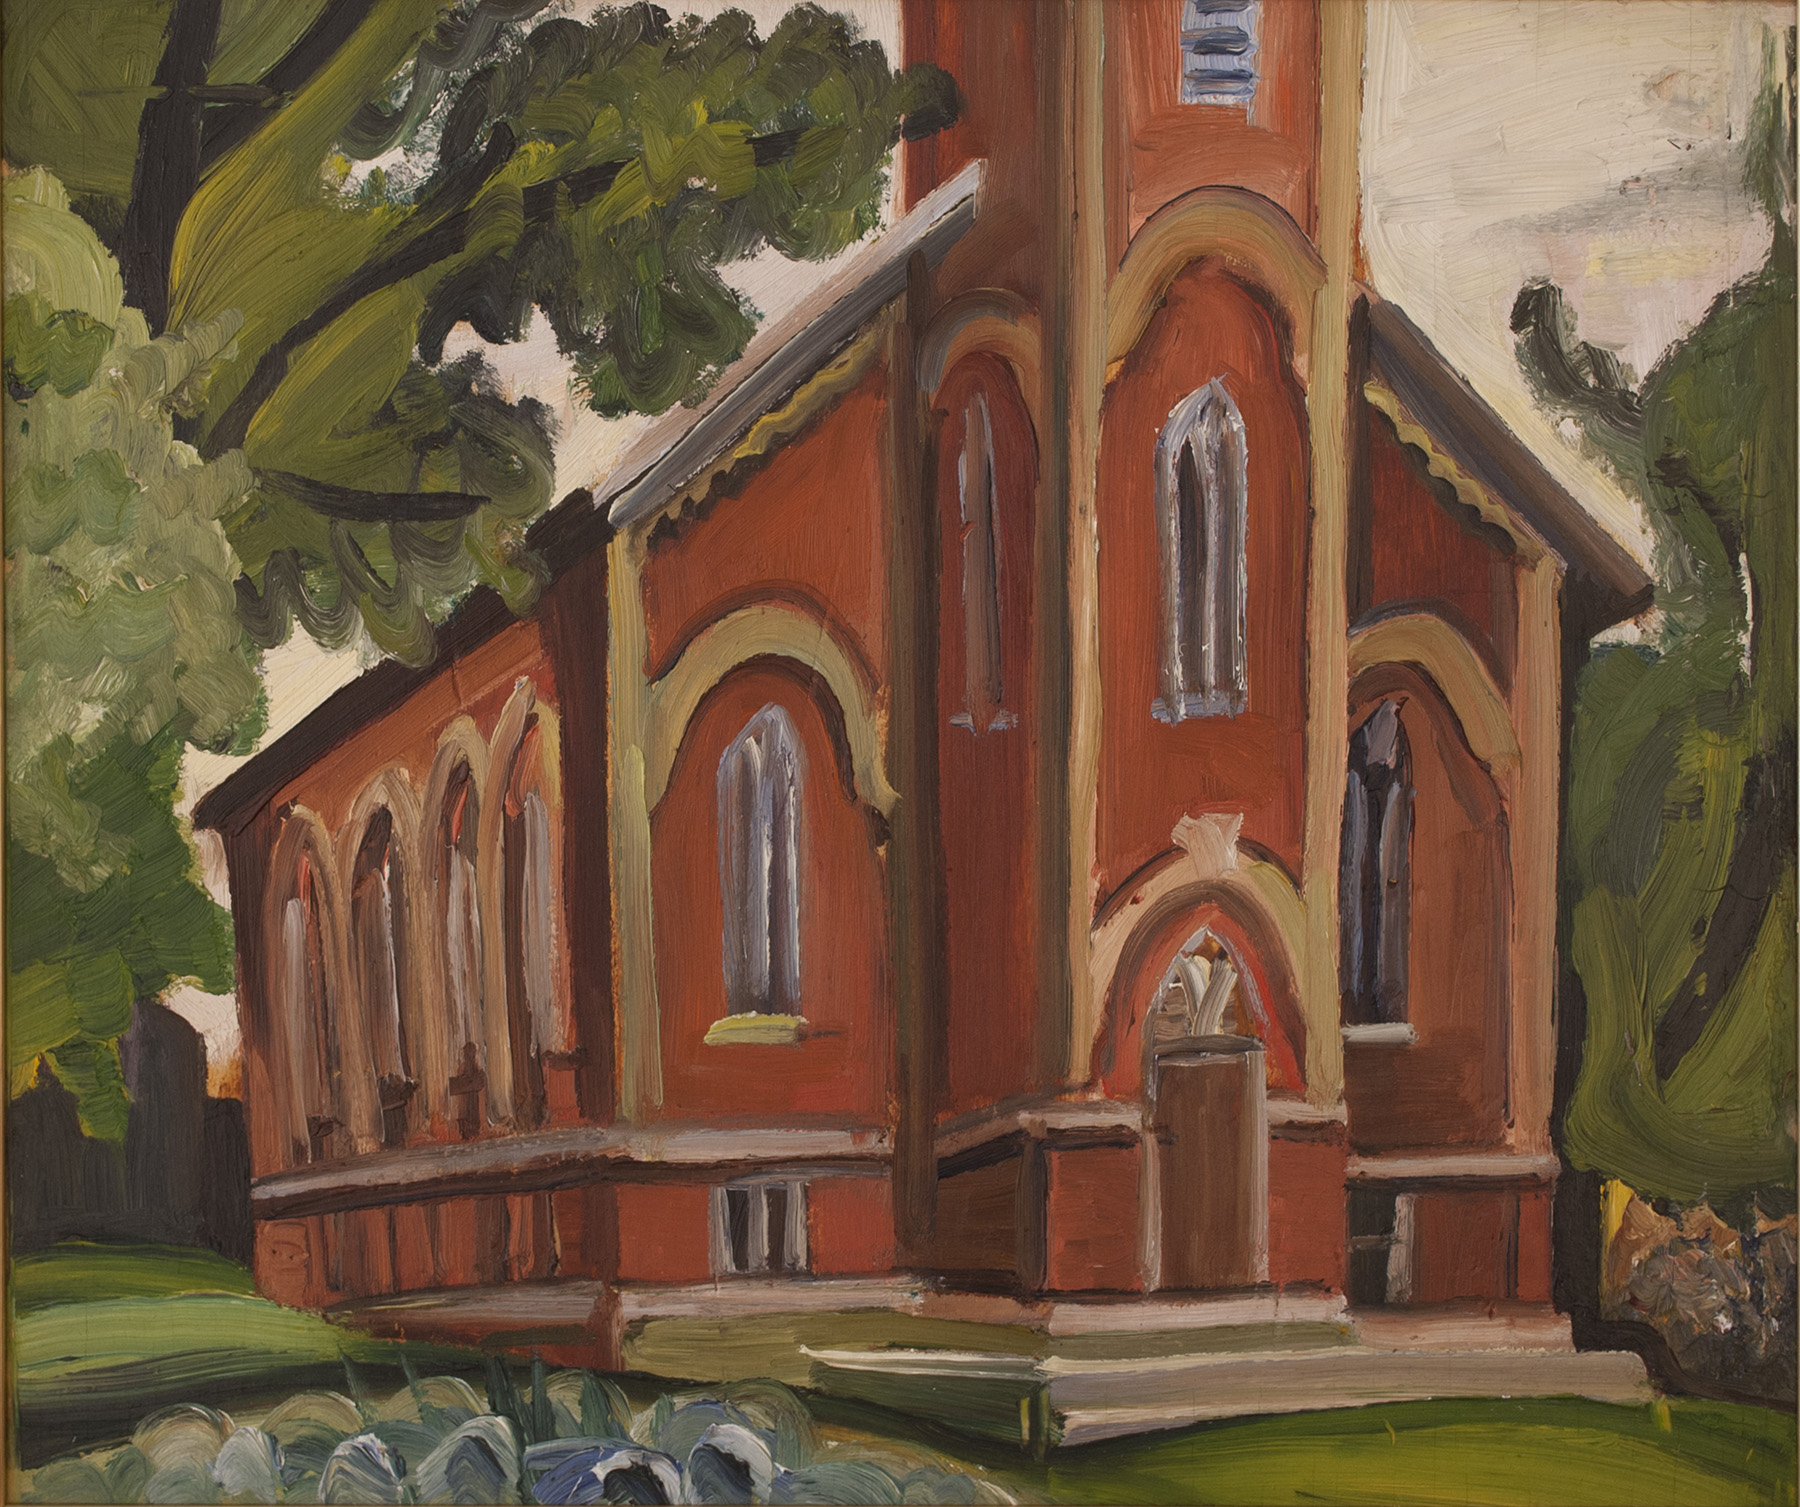 Church in the country, Oil on panel, 12'' x 14''